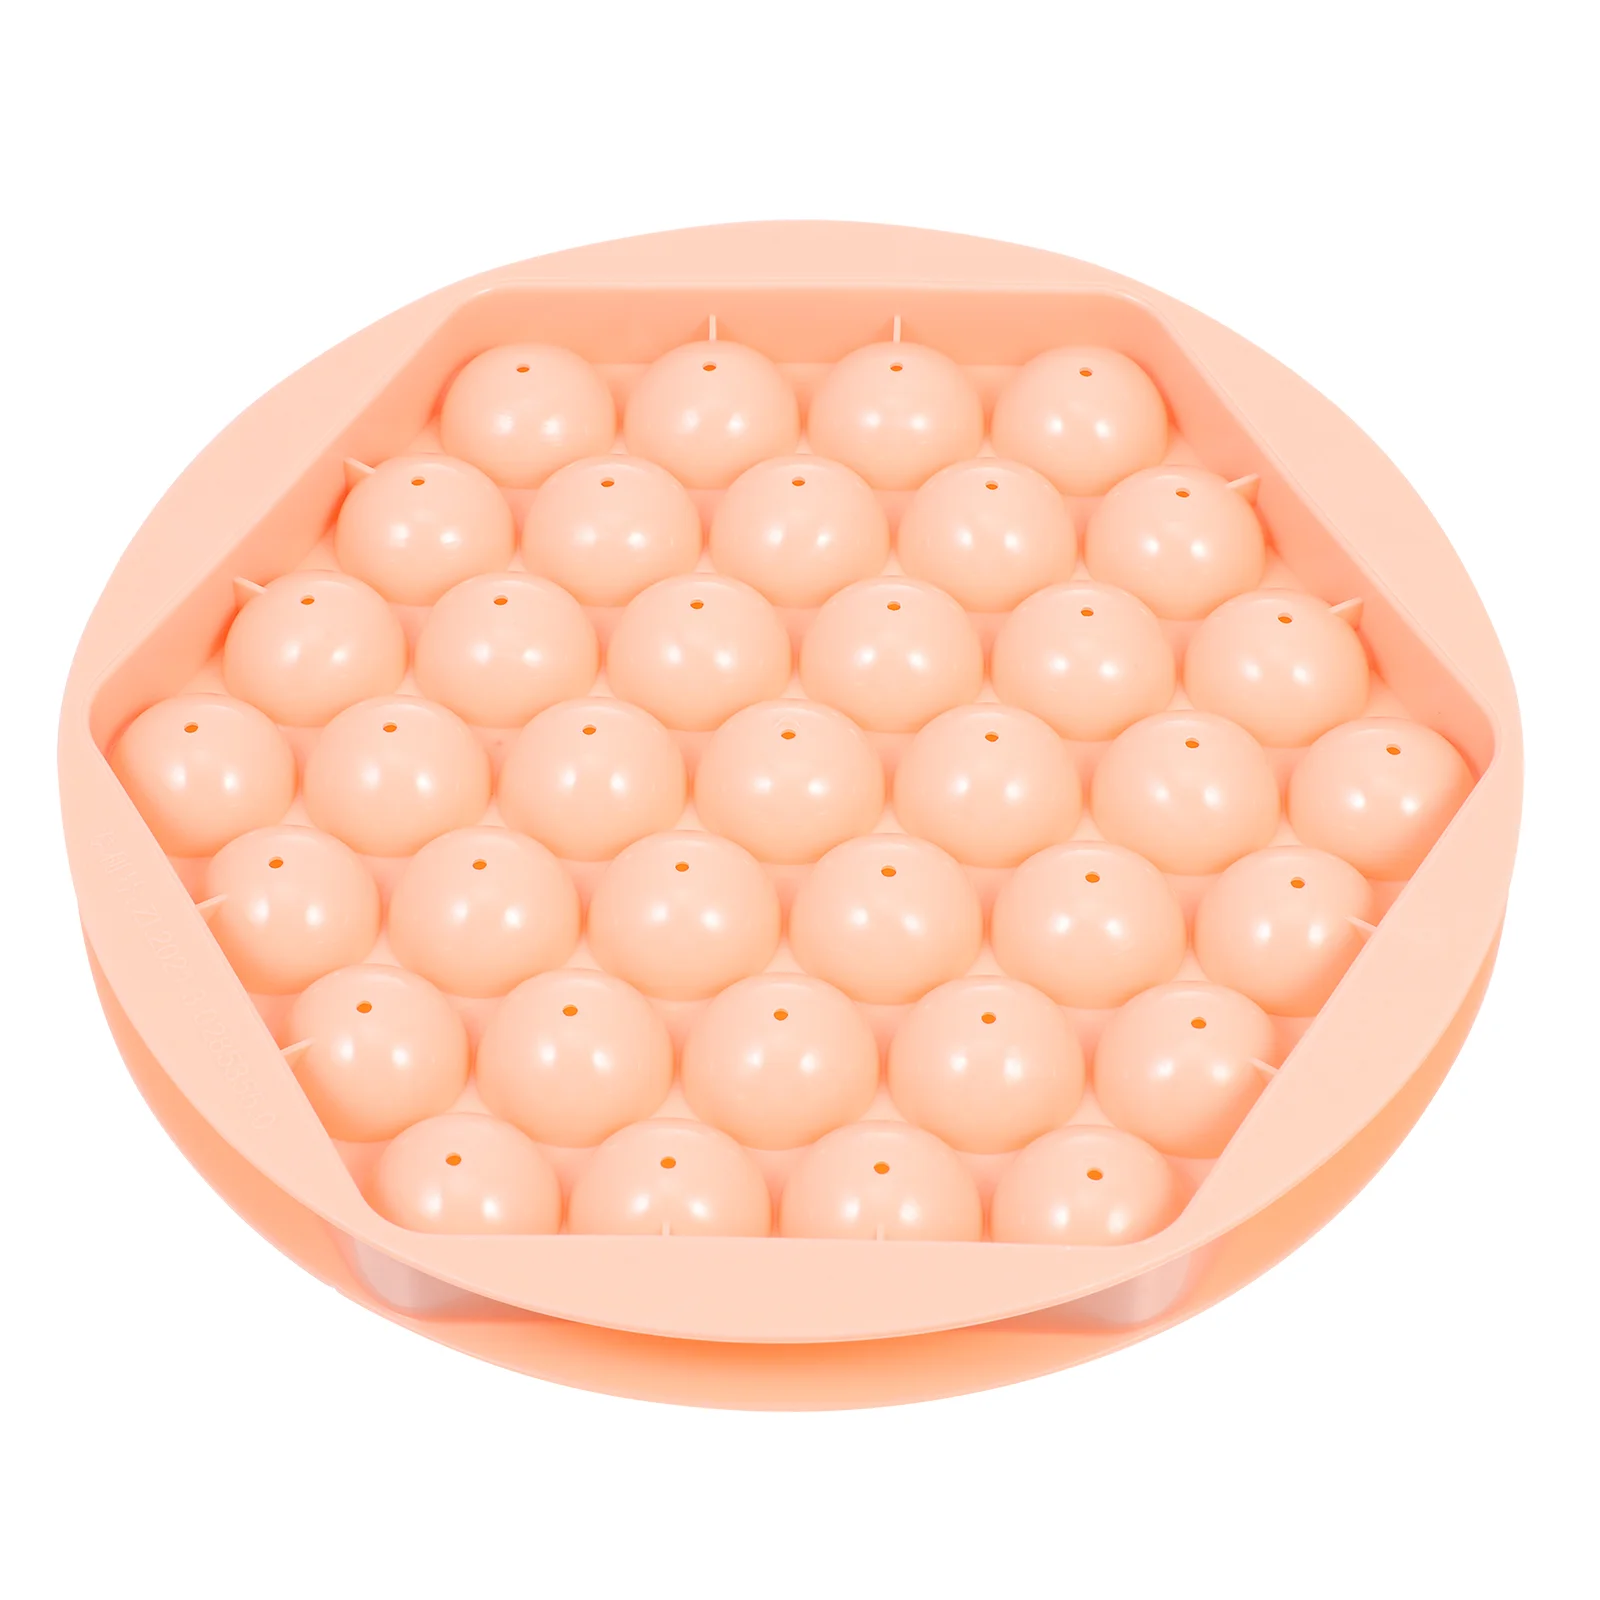 

Ice Mold Cube Maker Tray Molds Round Whiskey Spheres Silicone Freezer Box Circle Trays Cocktail Tea Mini Reusable Containers